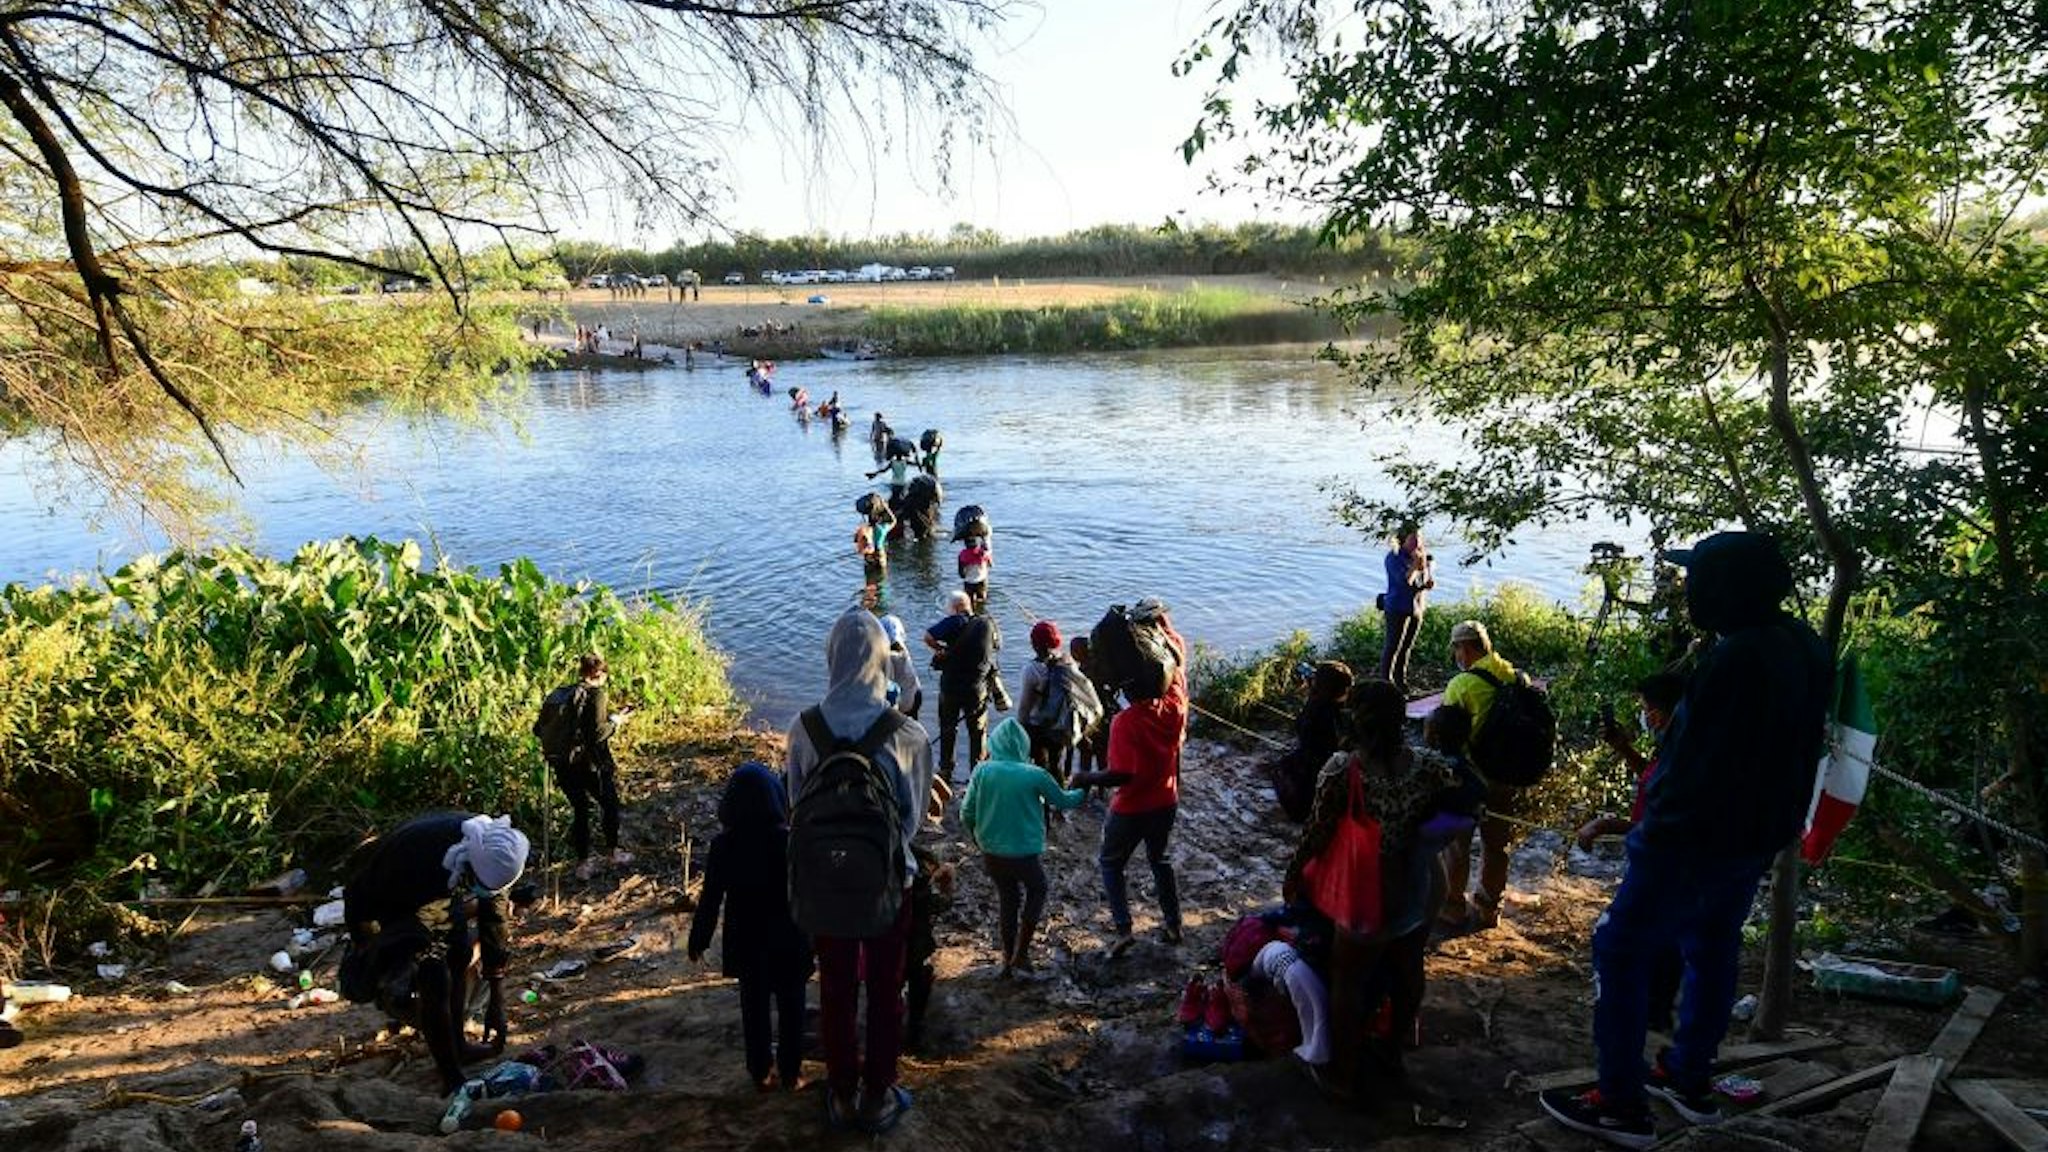 Haitian migrants cross the Rio Grande river as seen from Ciudad Acuna, Coahuila state, Mexico, on September 23, 2021. - Tension reigns this Thursday in a Haitian migrant camp in Ciudad Acuña (on the border with the United States), after the arrival of dozens of Mexican police officers. (Photo by PEDRO PARDO / AFP) (Photo by PEDRO PARDO/AFP via Getty Images)